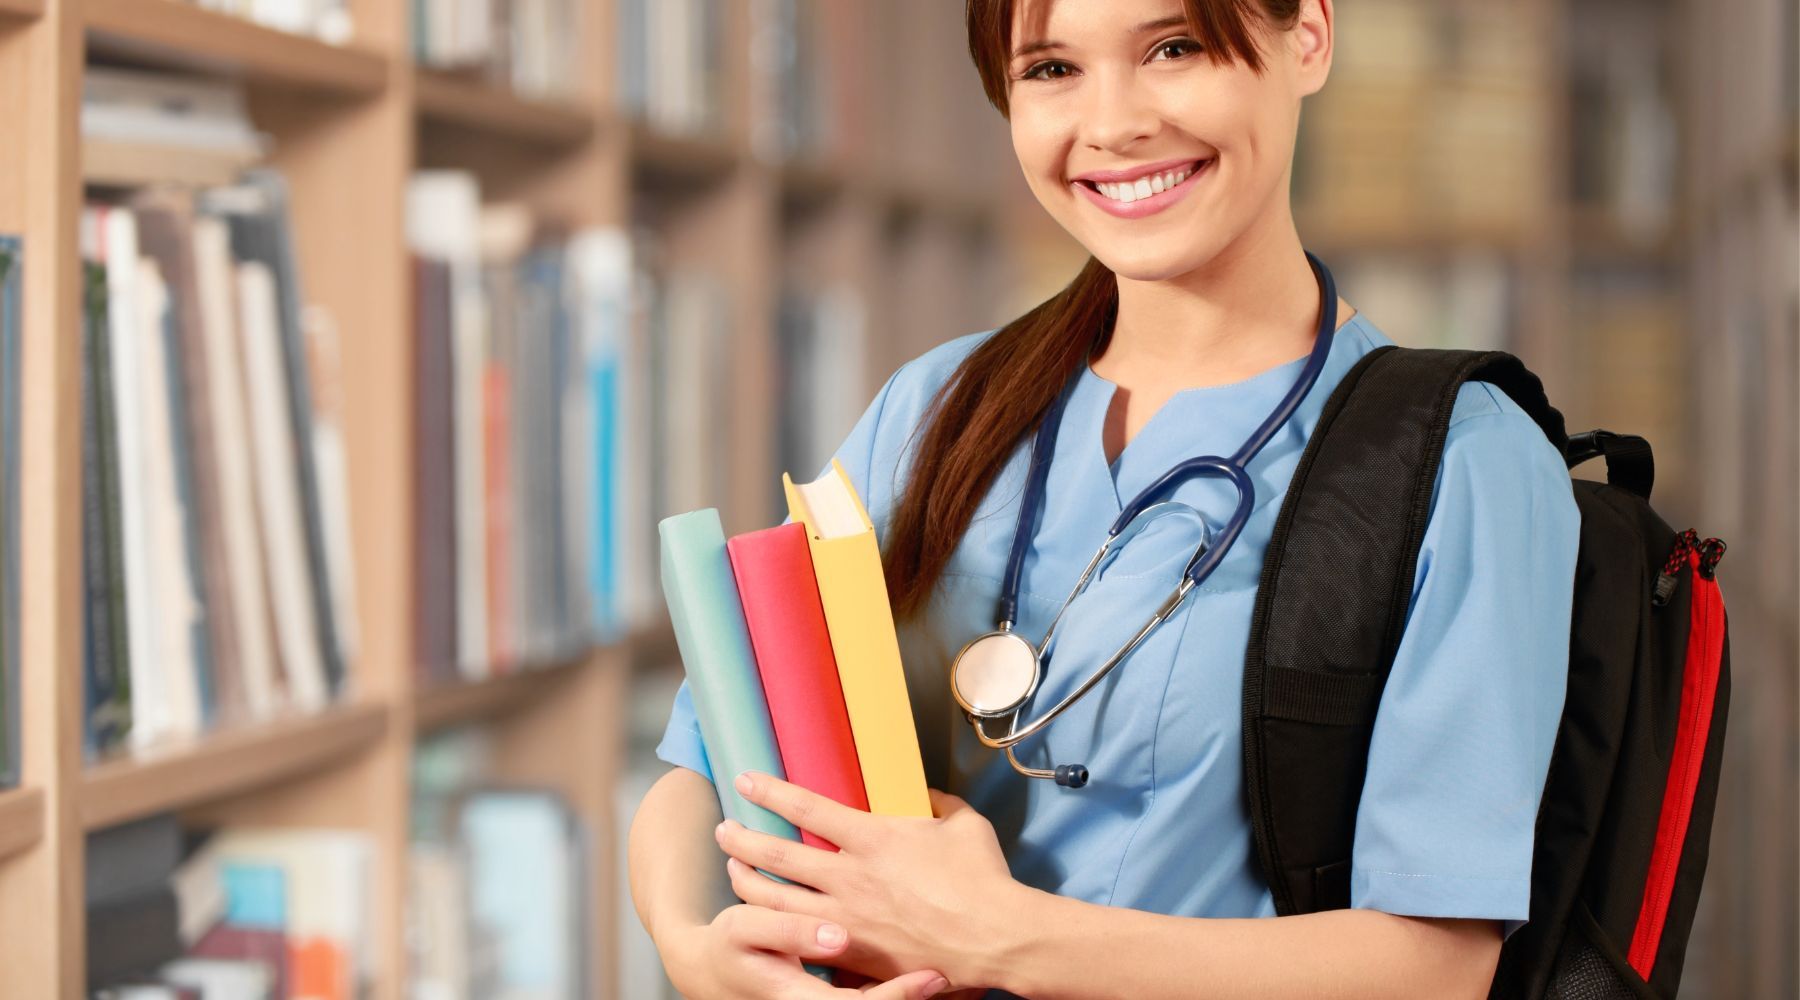 Nursing Student with backpack